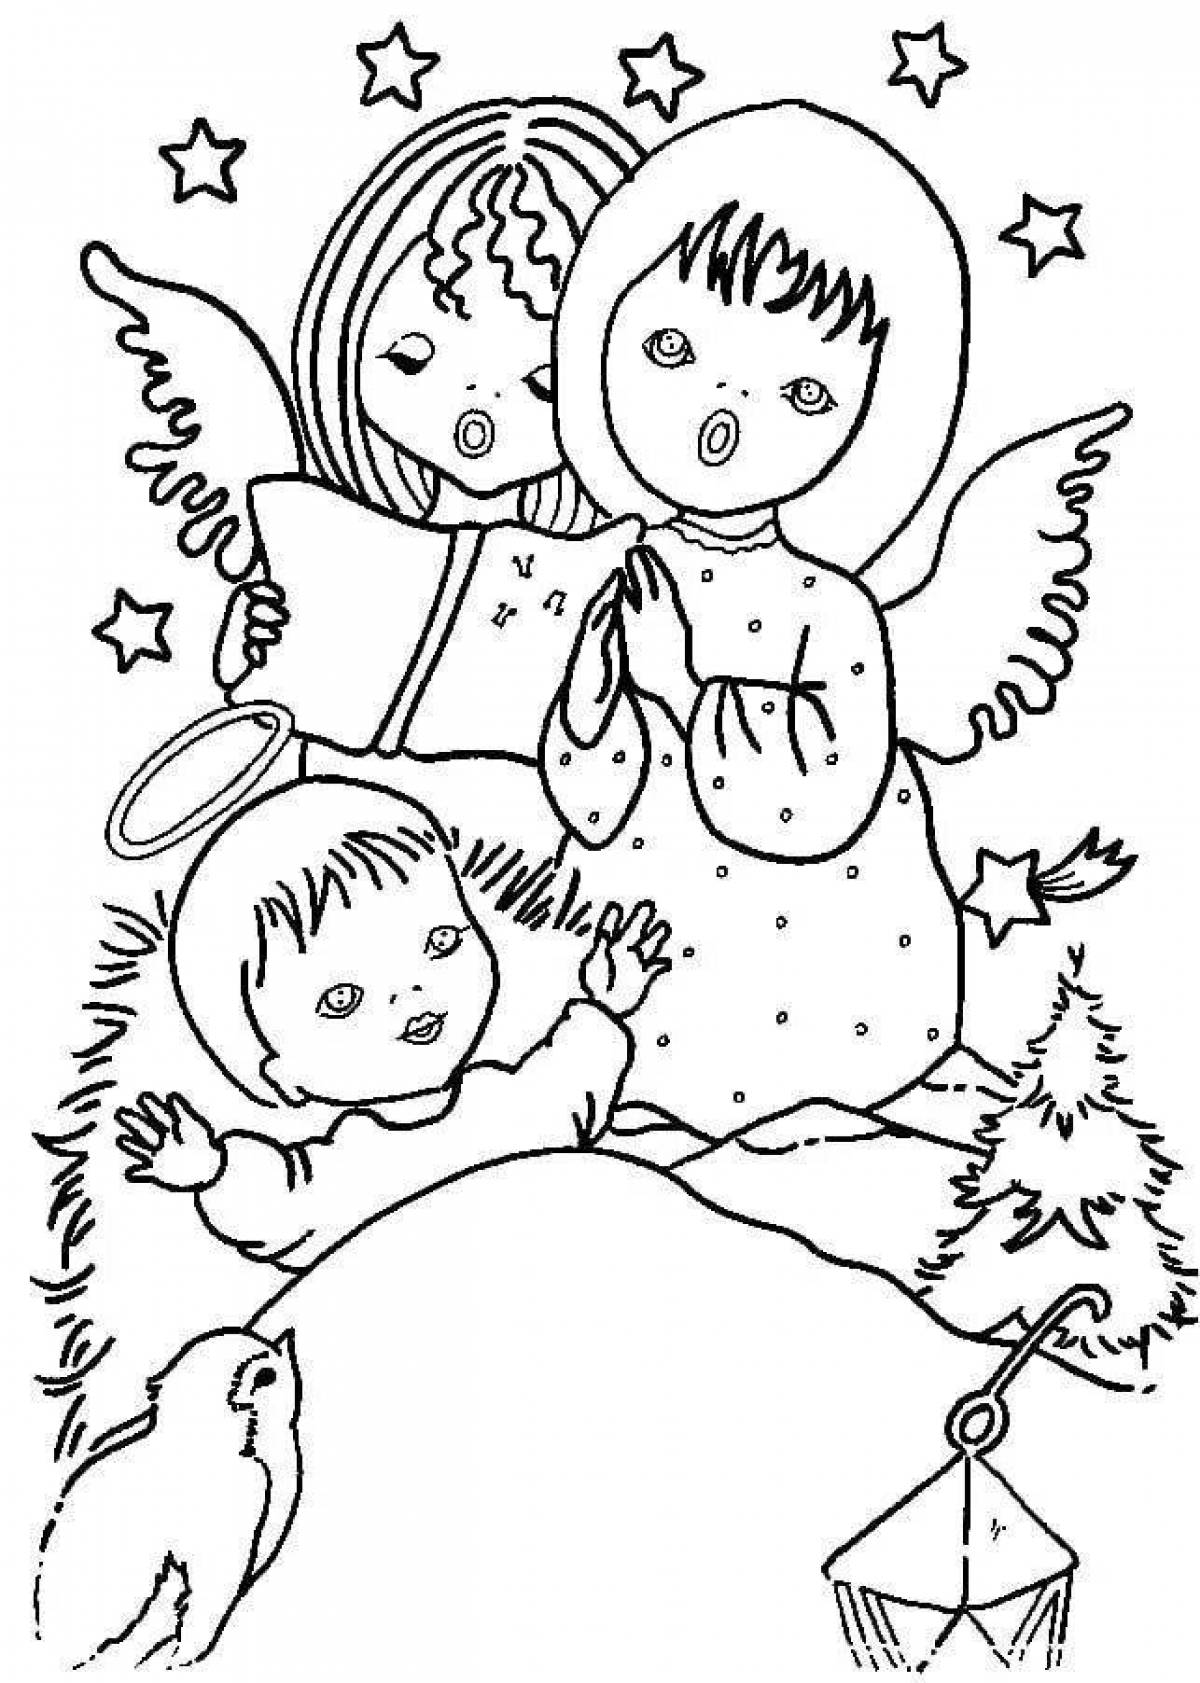 Merry christmas coloring book